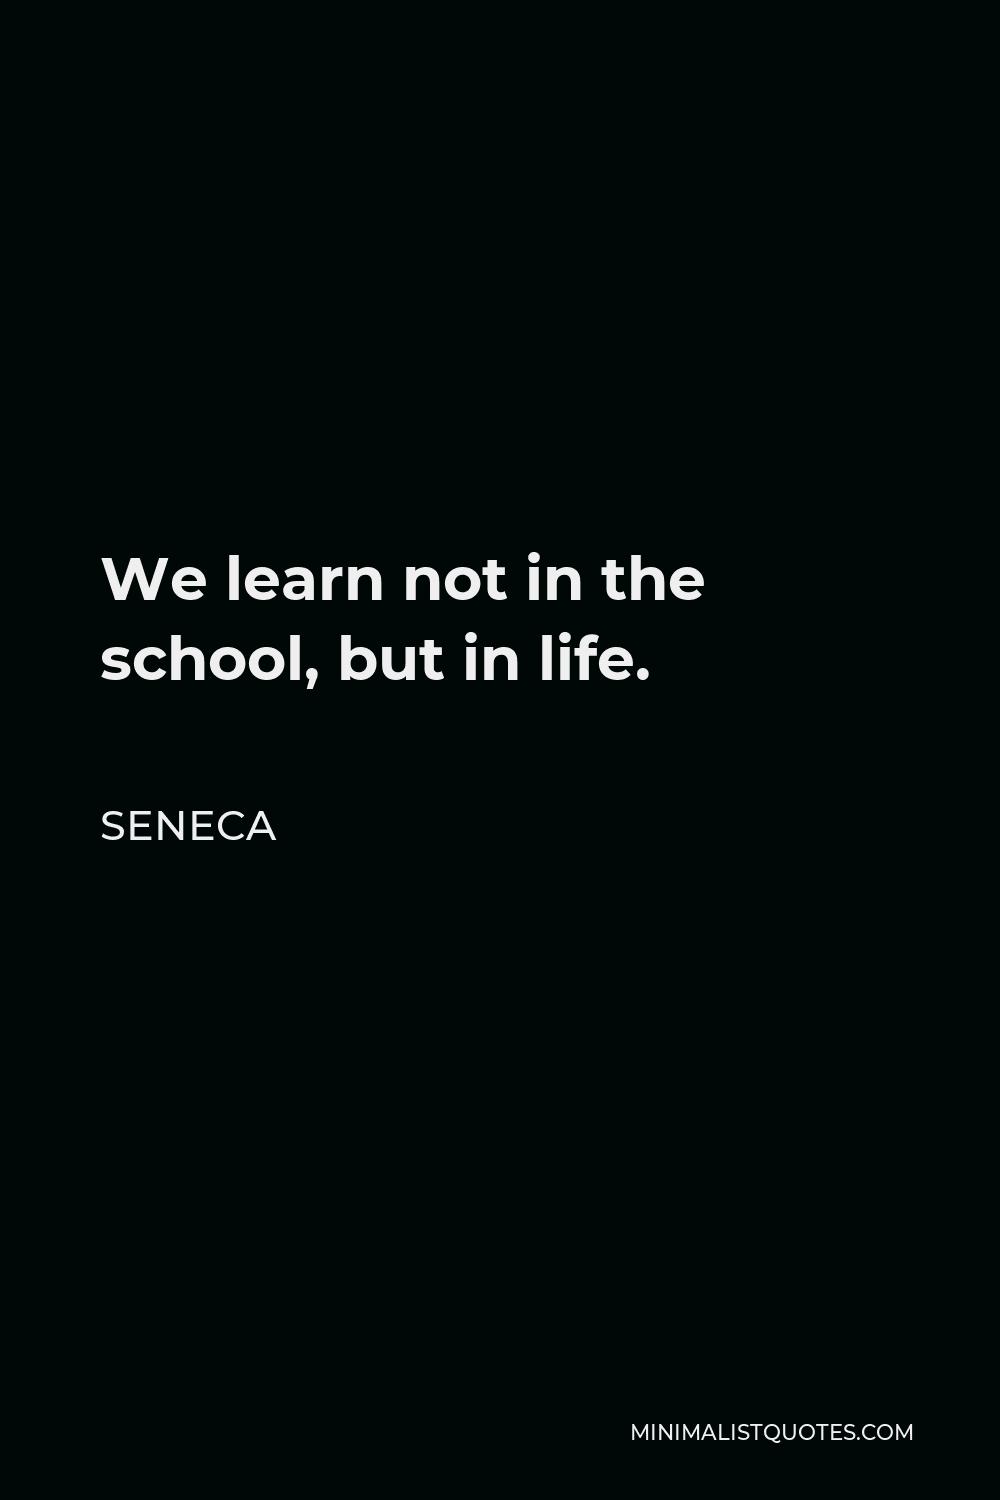 Seneca Quote - We learn not in the school, but in life.